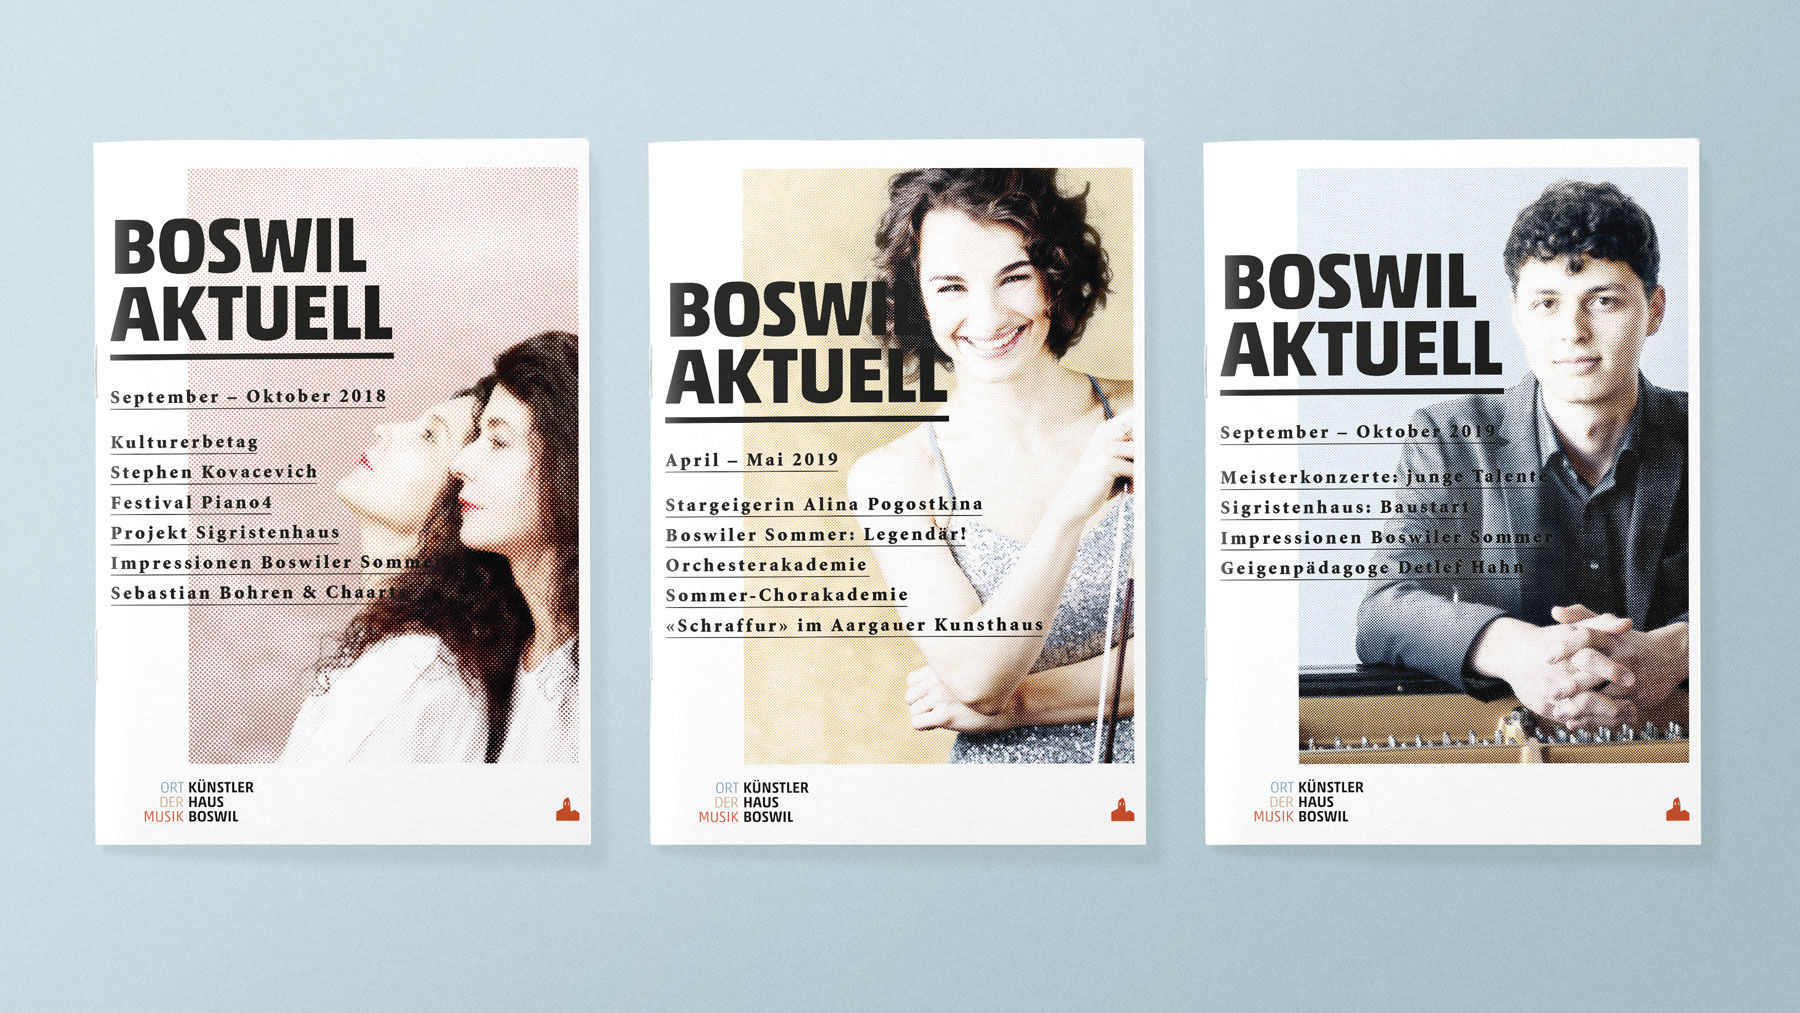 Boswil aktuell Covers